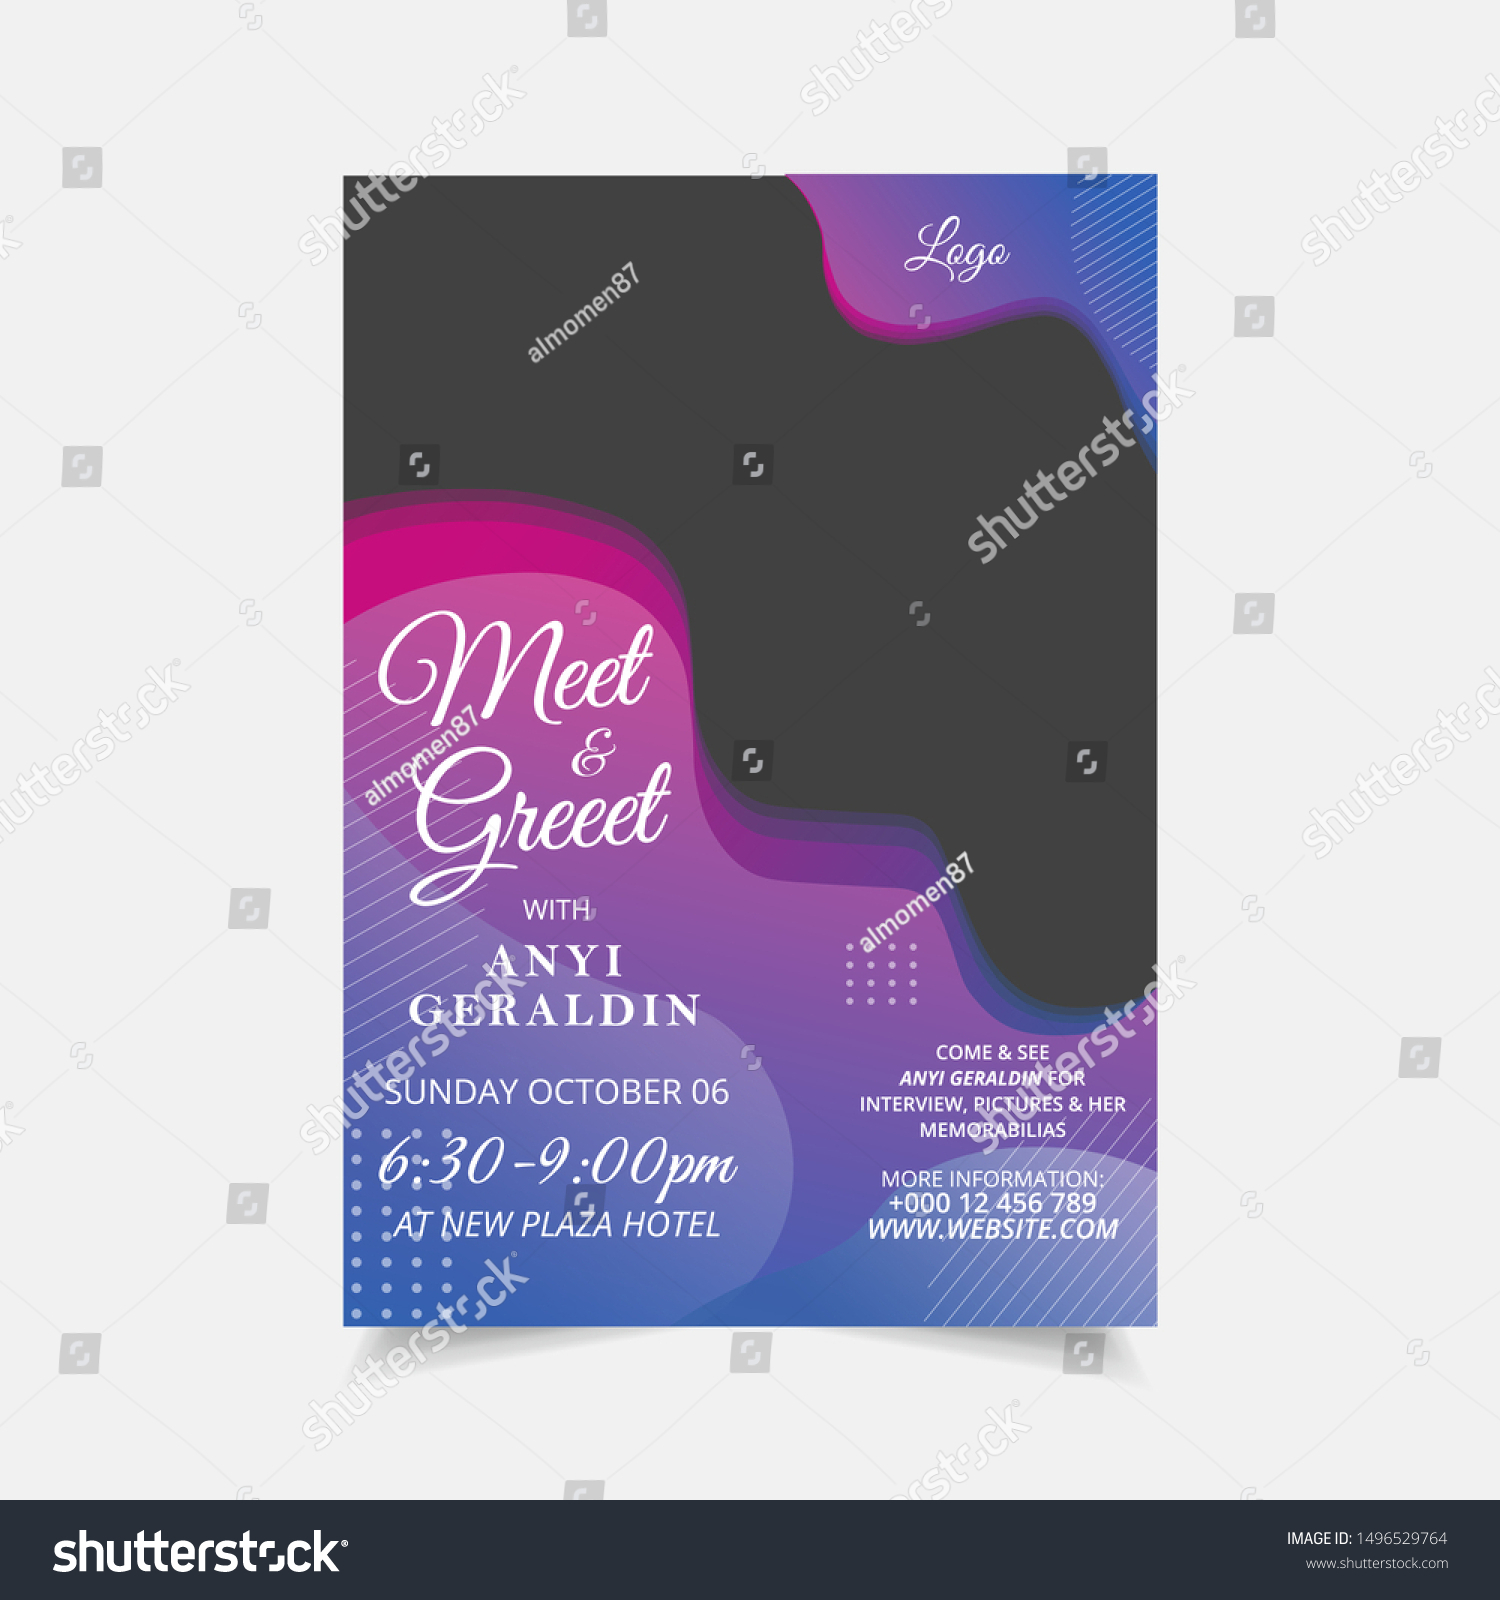 Abstract Meet Greet Flyer Templates Cleibraties Stock Vector With Meet And Greet Flyers Templates